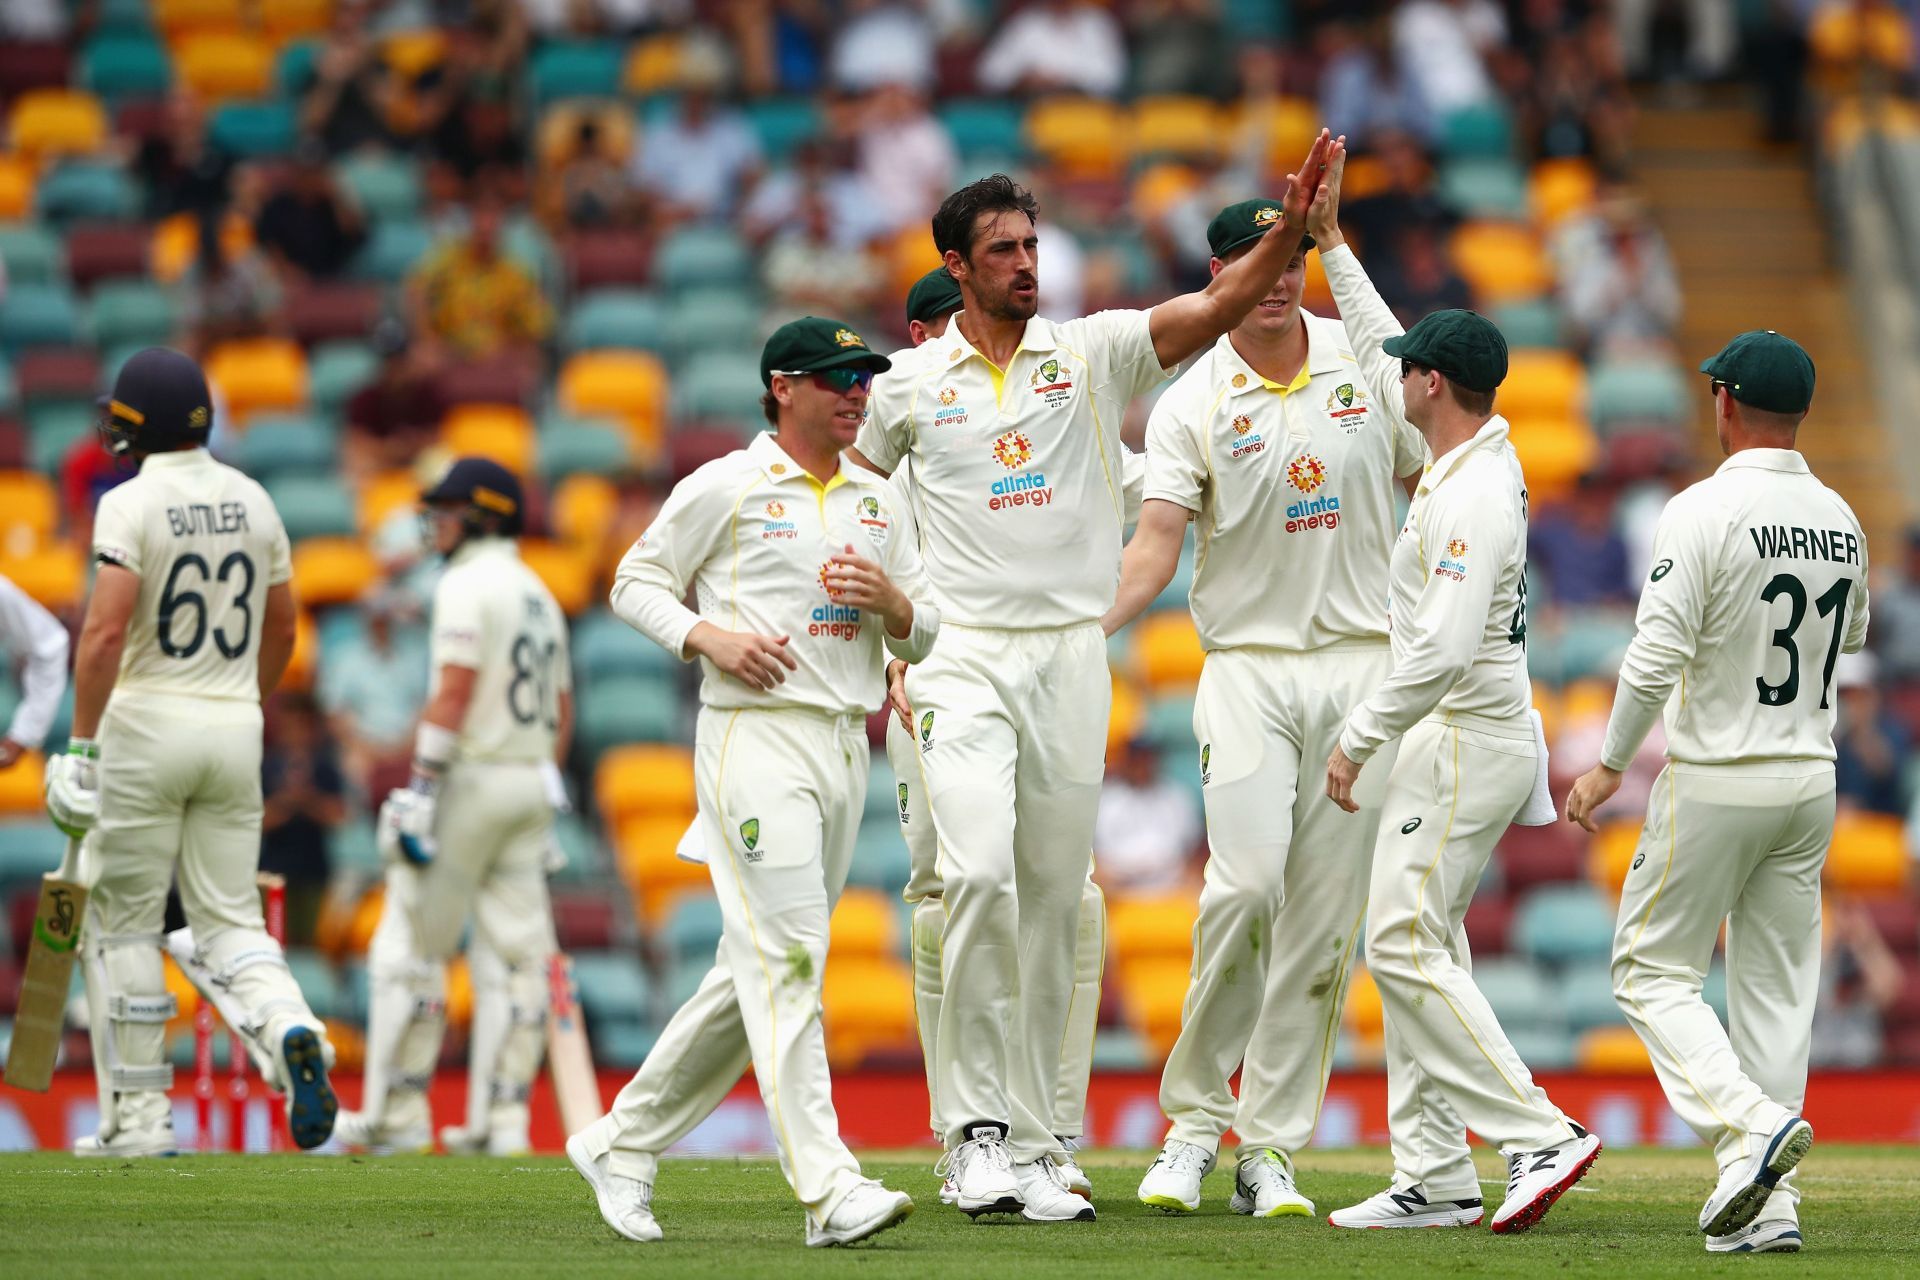 Mitchell Starc dismissed Rory Burns off the first ball of the Test